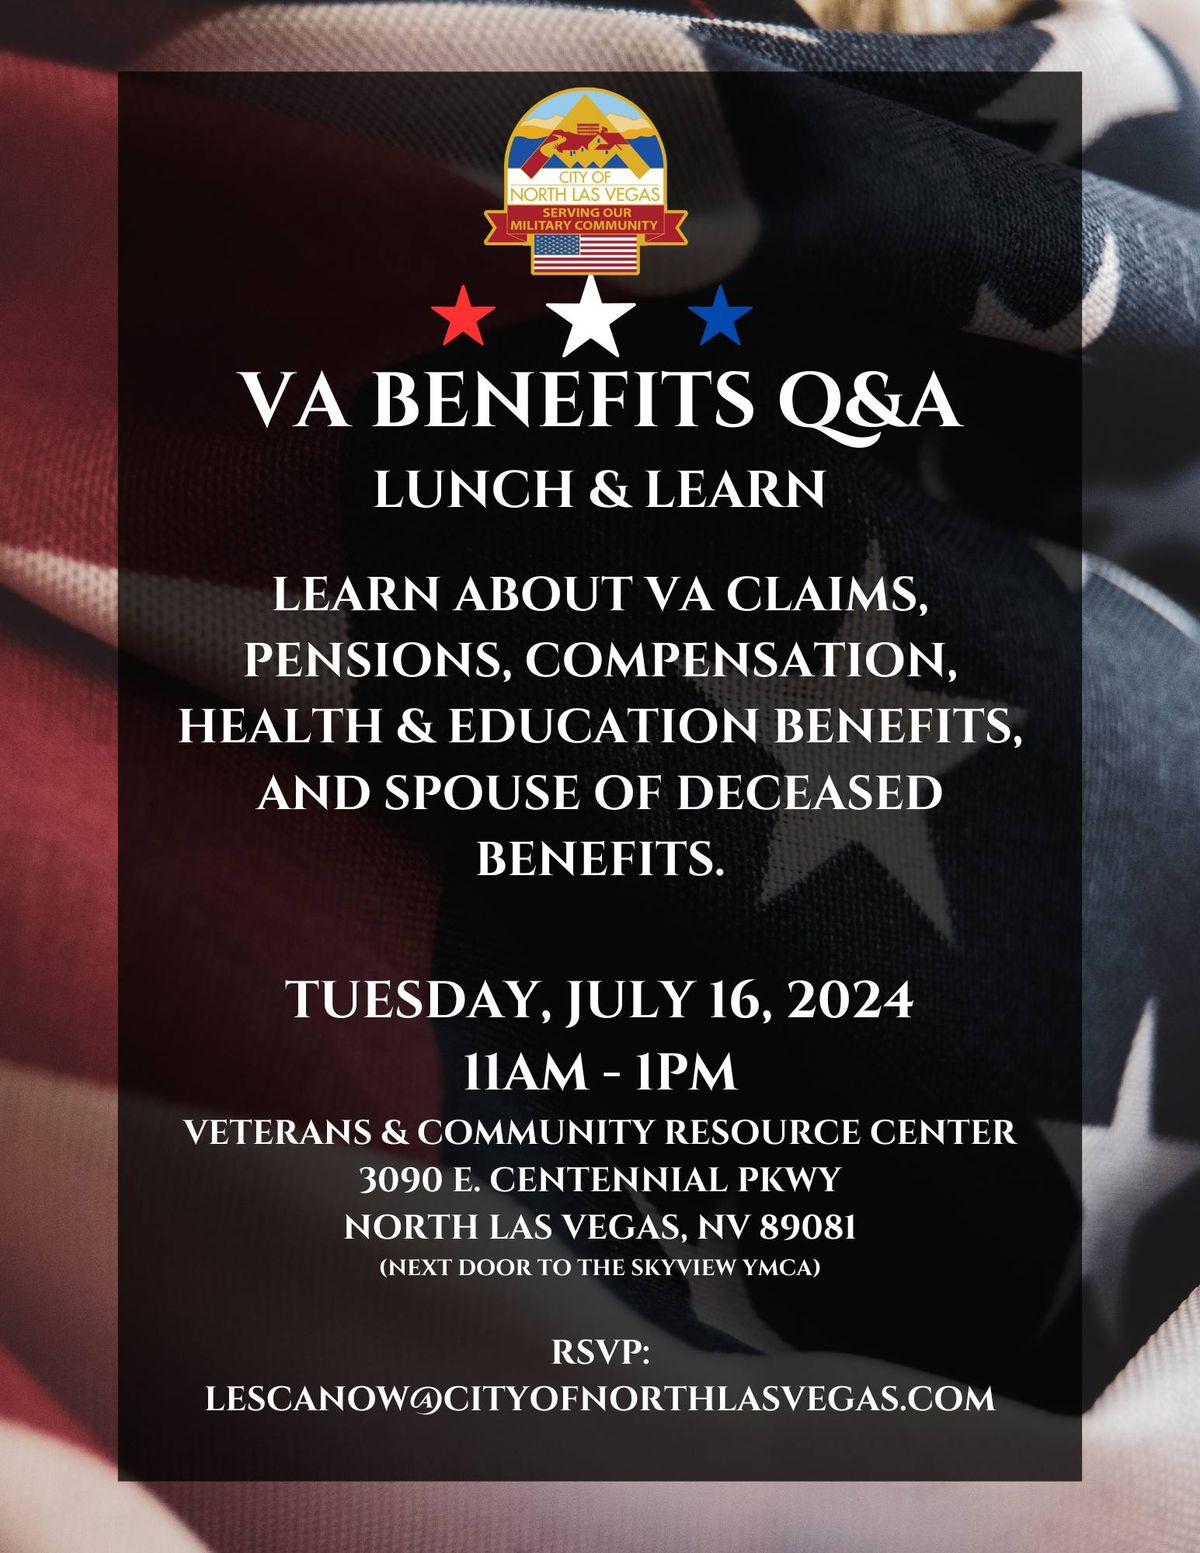 VA Benefits Q&A Lunch & Learn 